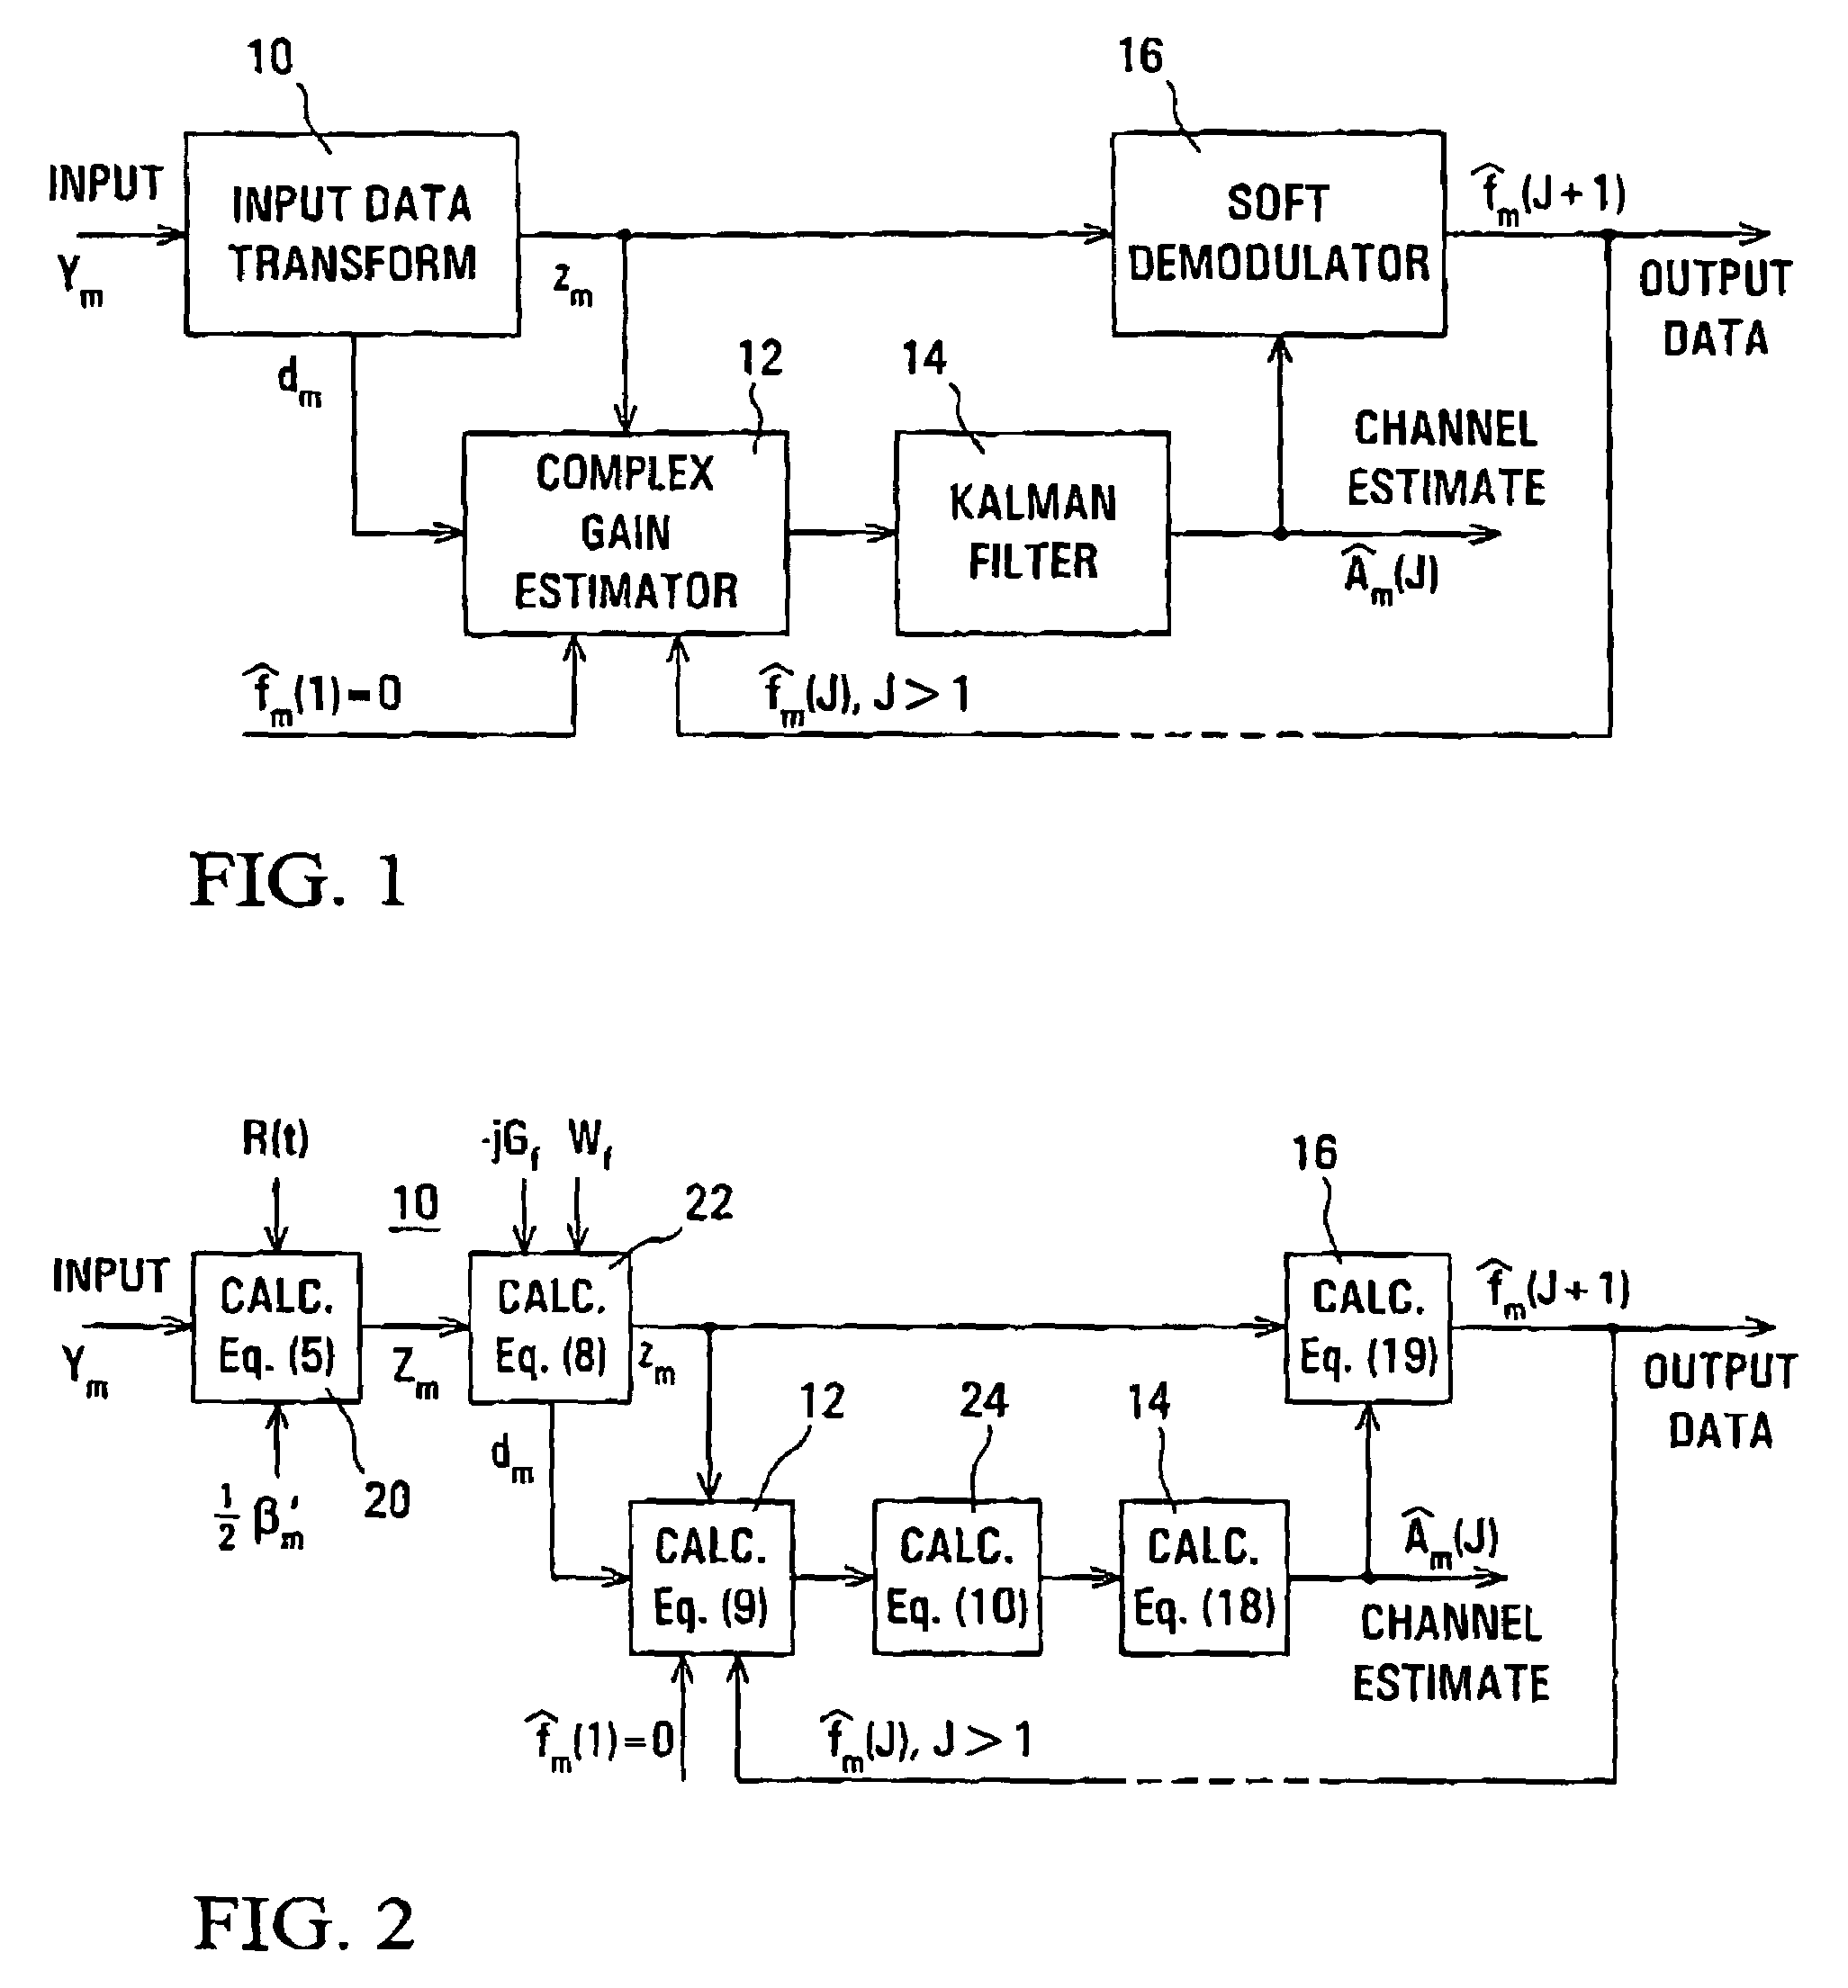 Channel estimation in CDMA communications systems using both lower power pilot channel and higher power date channel